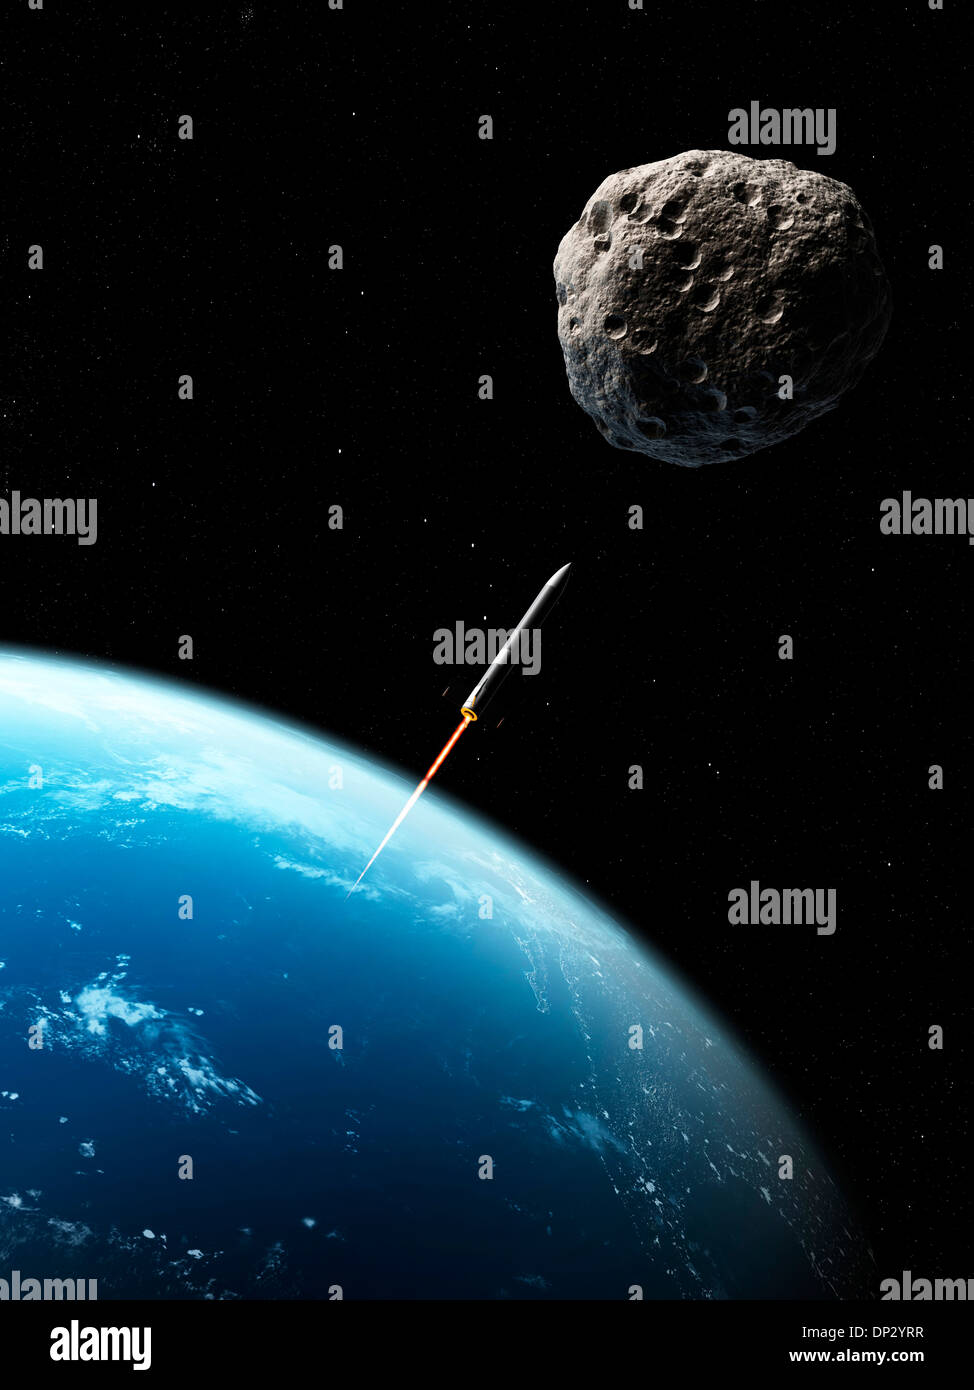 Asteroid defence missile, artwork Stock Photo